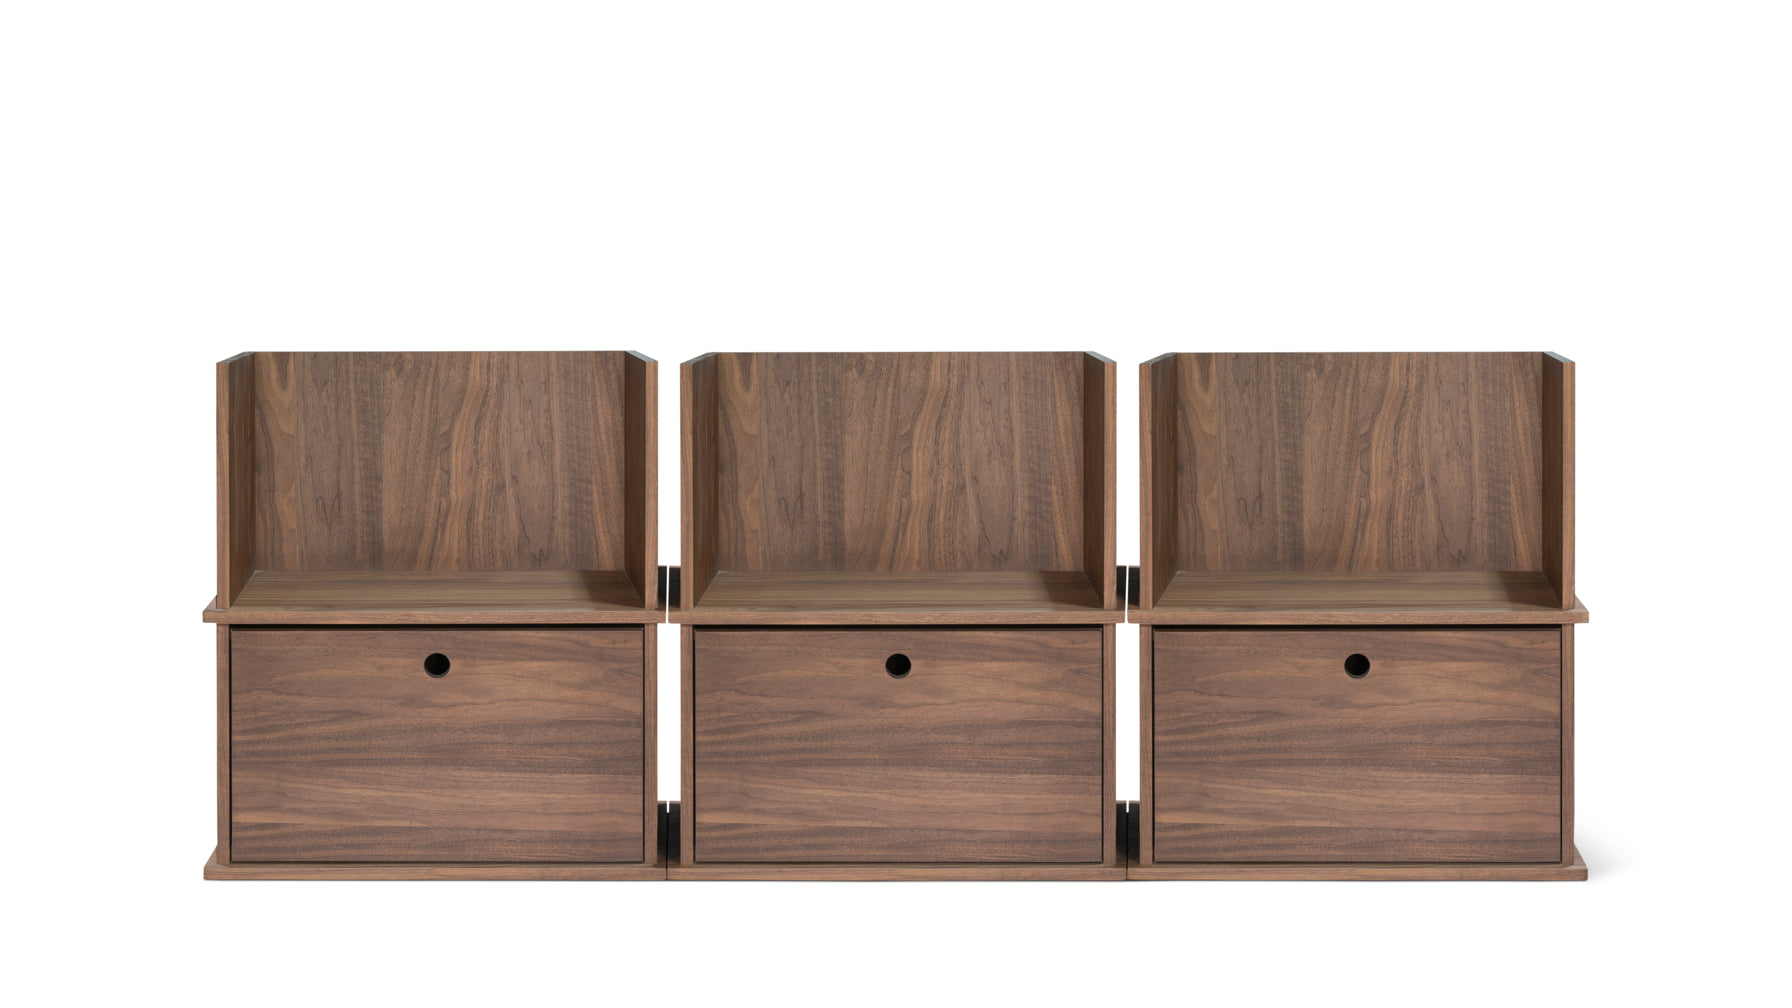 Keep Stacking Storage System 6-Piece, Open and Closed, Walnut - Image 6